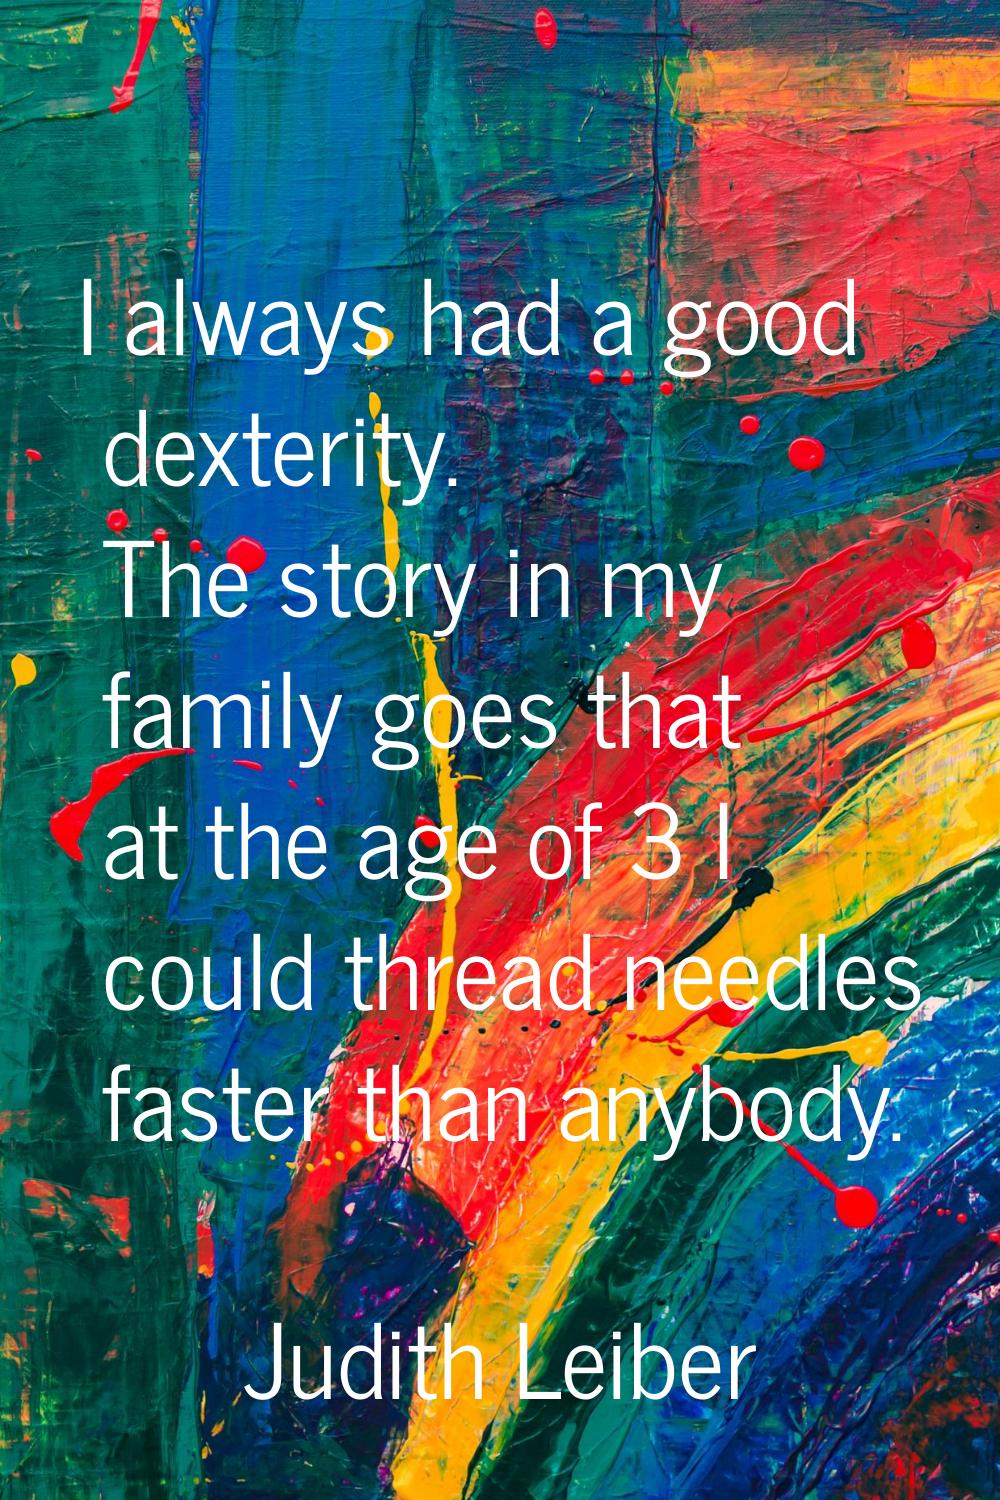 I always had a good dexterity. The story in my family goes that at the age of 3 I could thread need